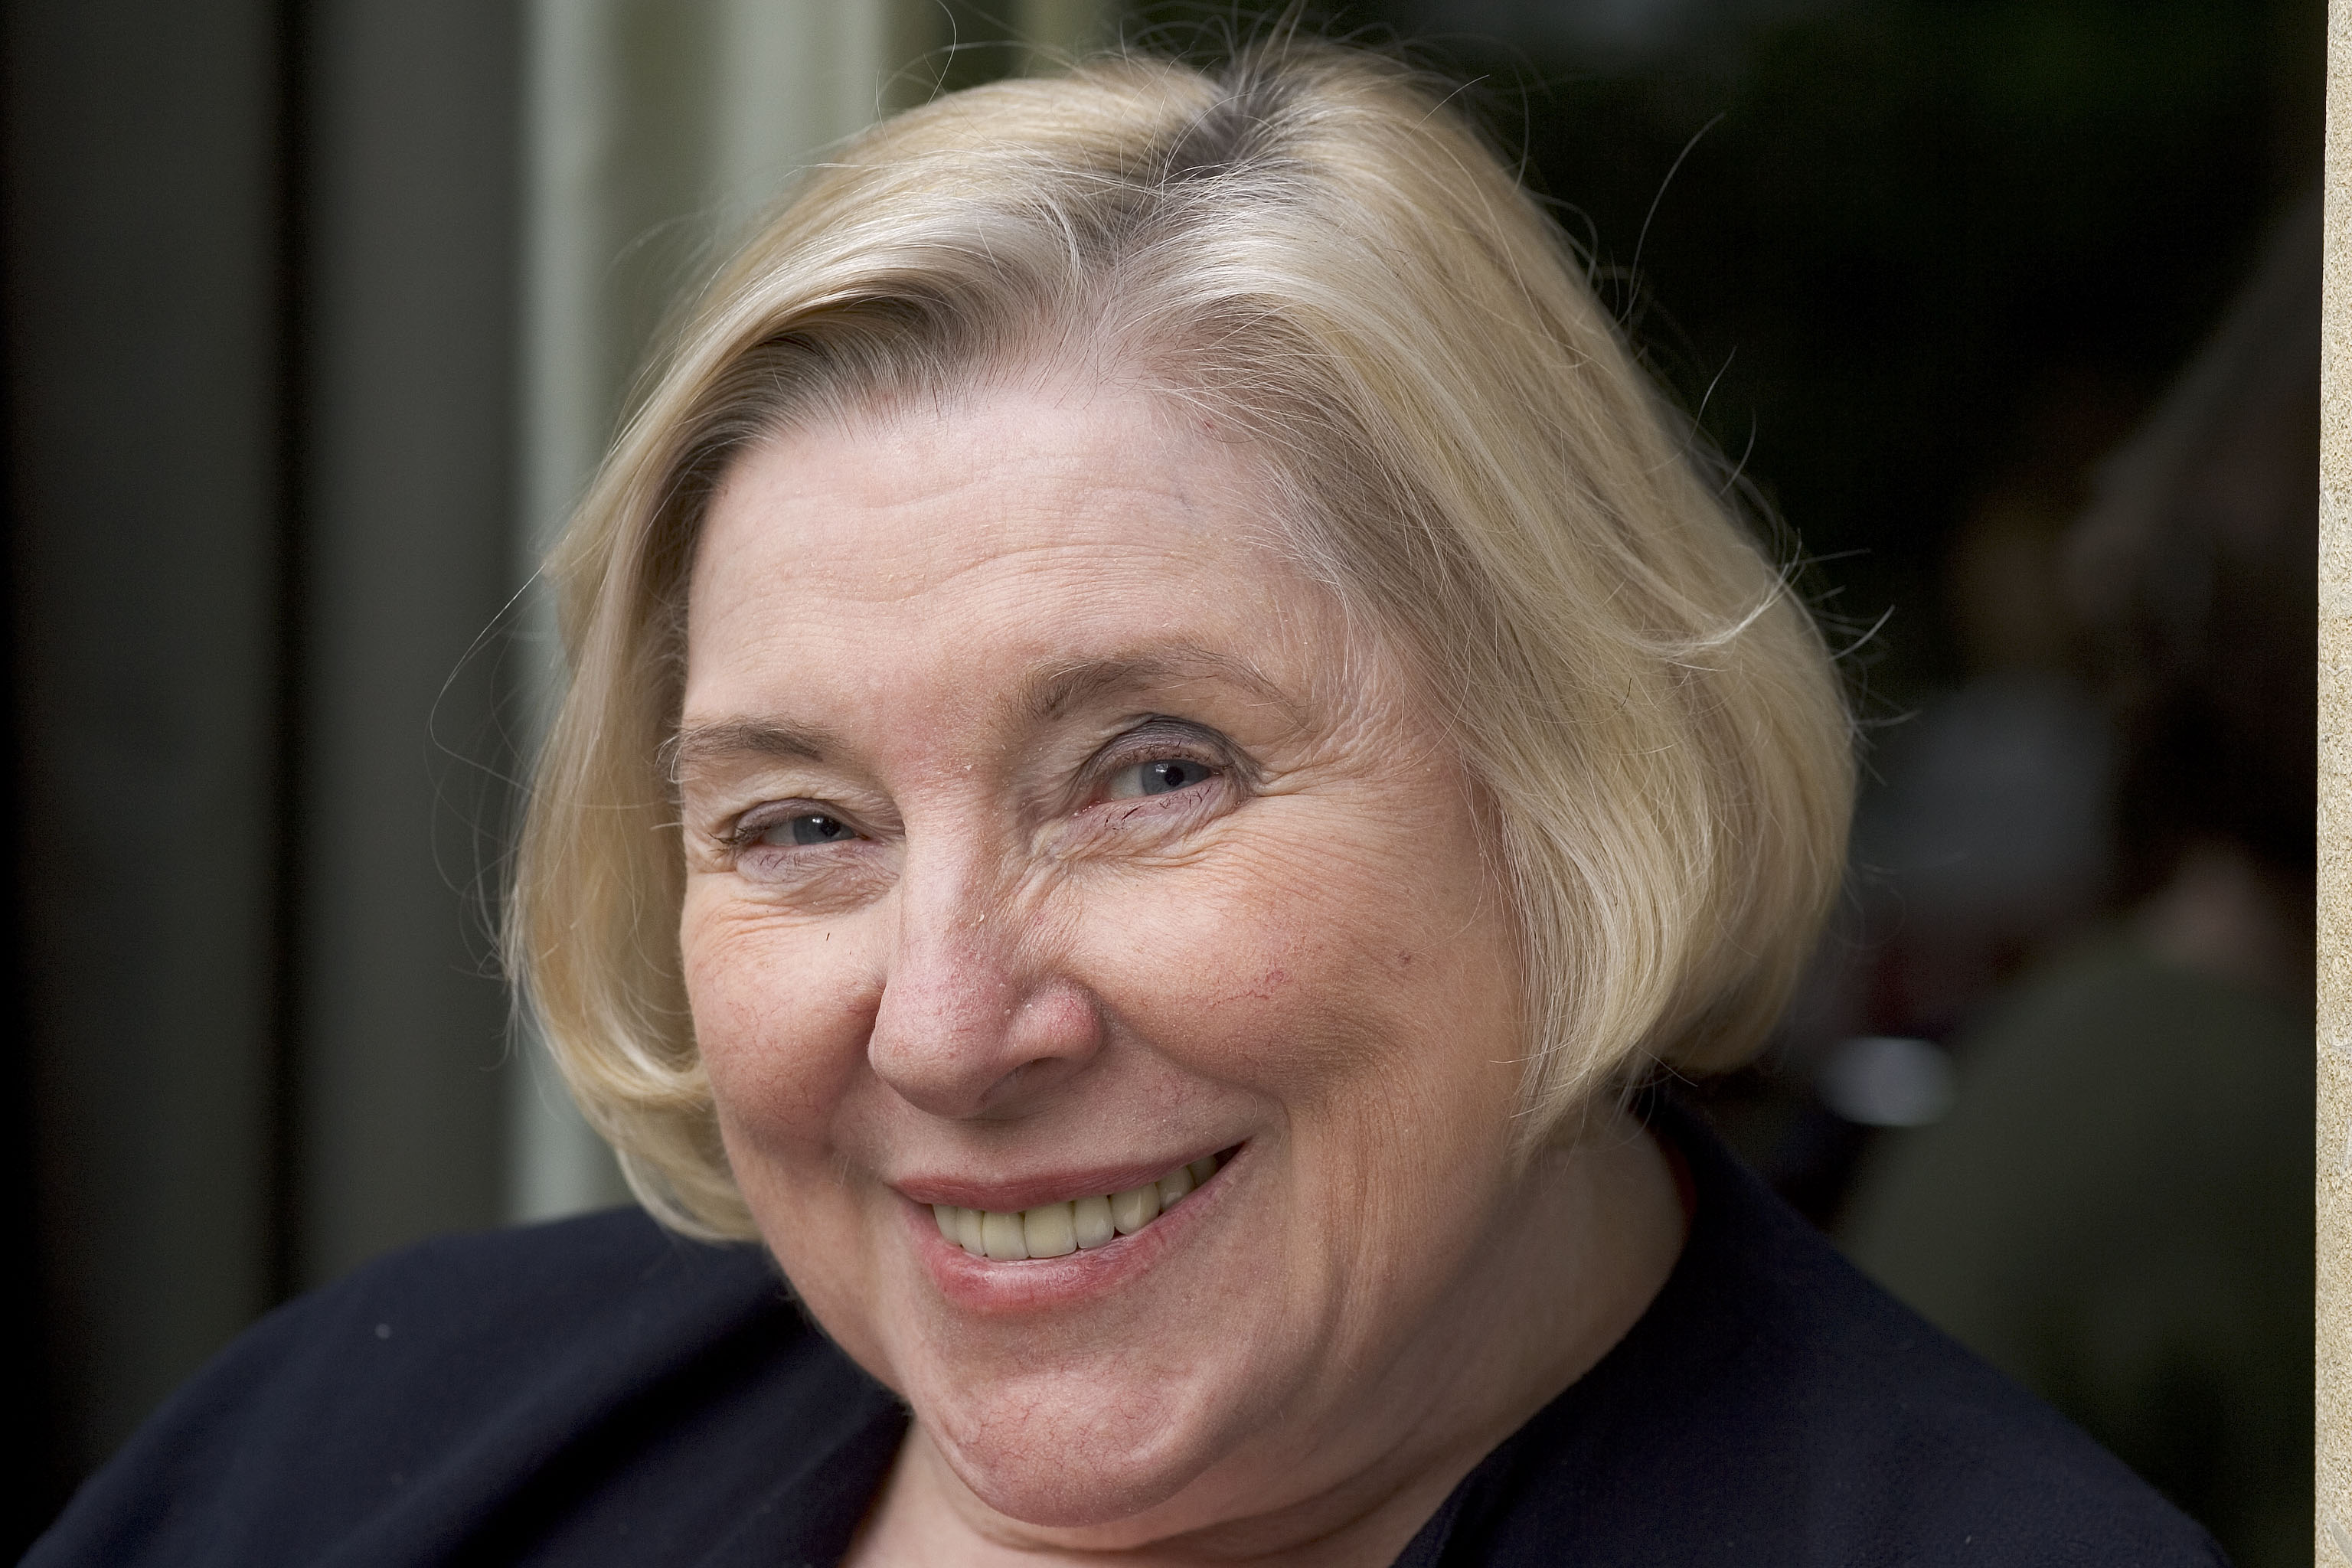 Fay Weldon died aged 91 in January